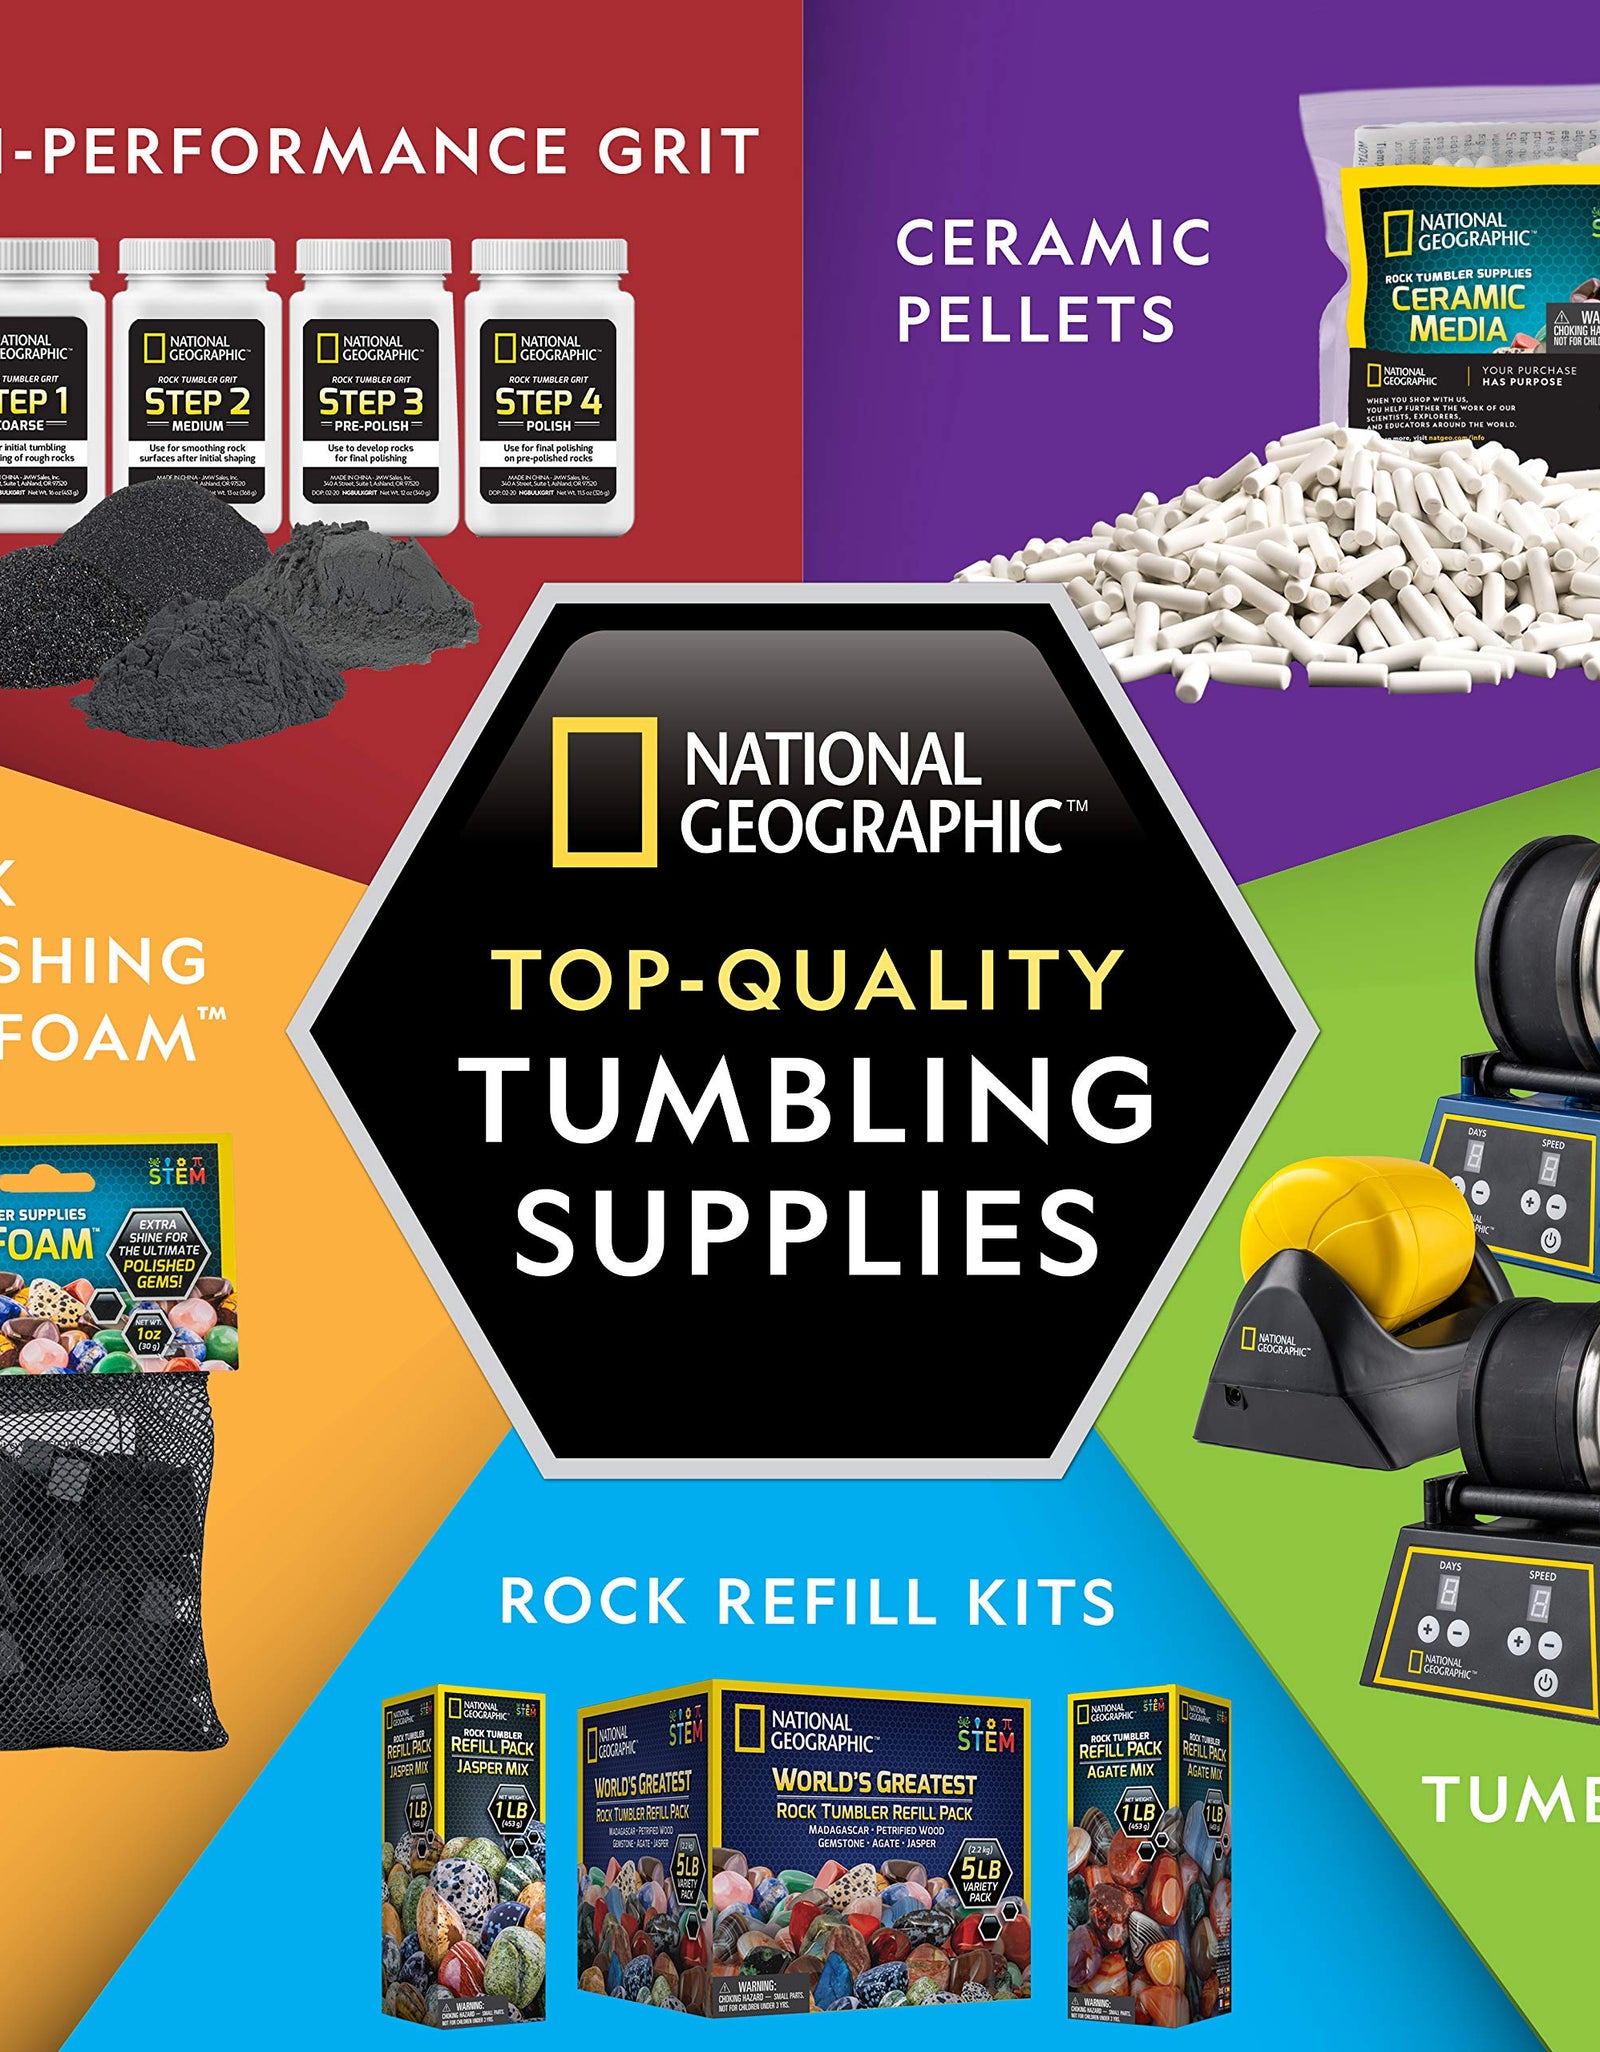 NATIONAL GEOGRAPHIC Rock Tumbler Refill Kit - Gemstone Mix of 9 varieties including Tiger's Eye, Amethyst and Quartz - Comes with 4 grades of Grit, Jewelry Fastenings and detailed Learning Guide